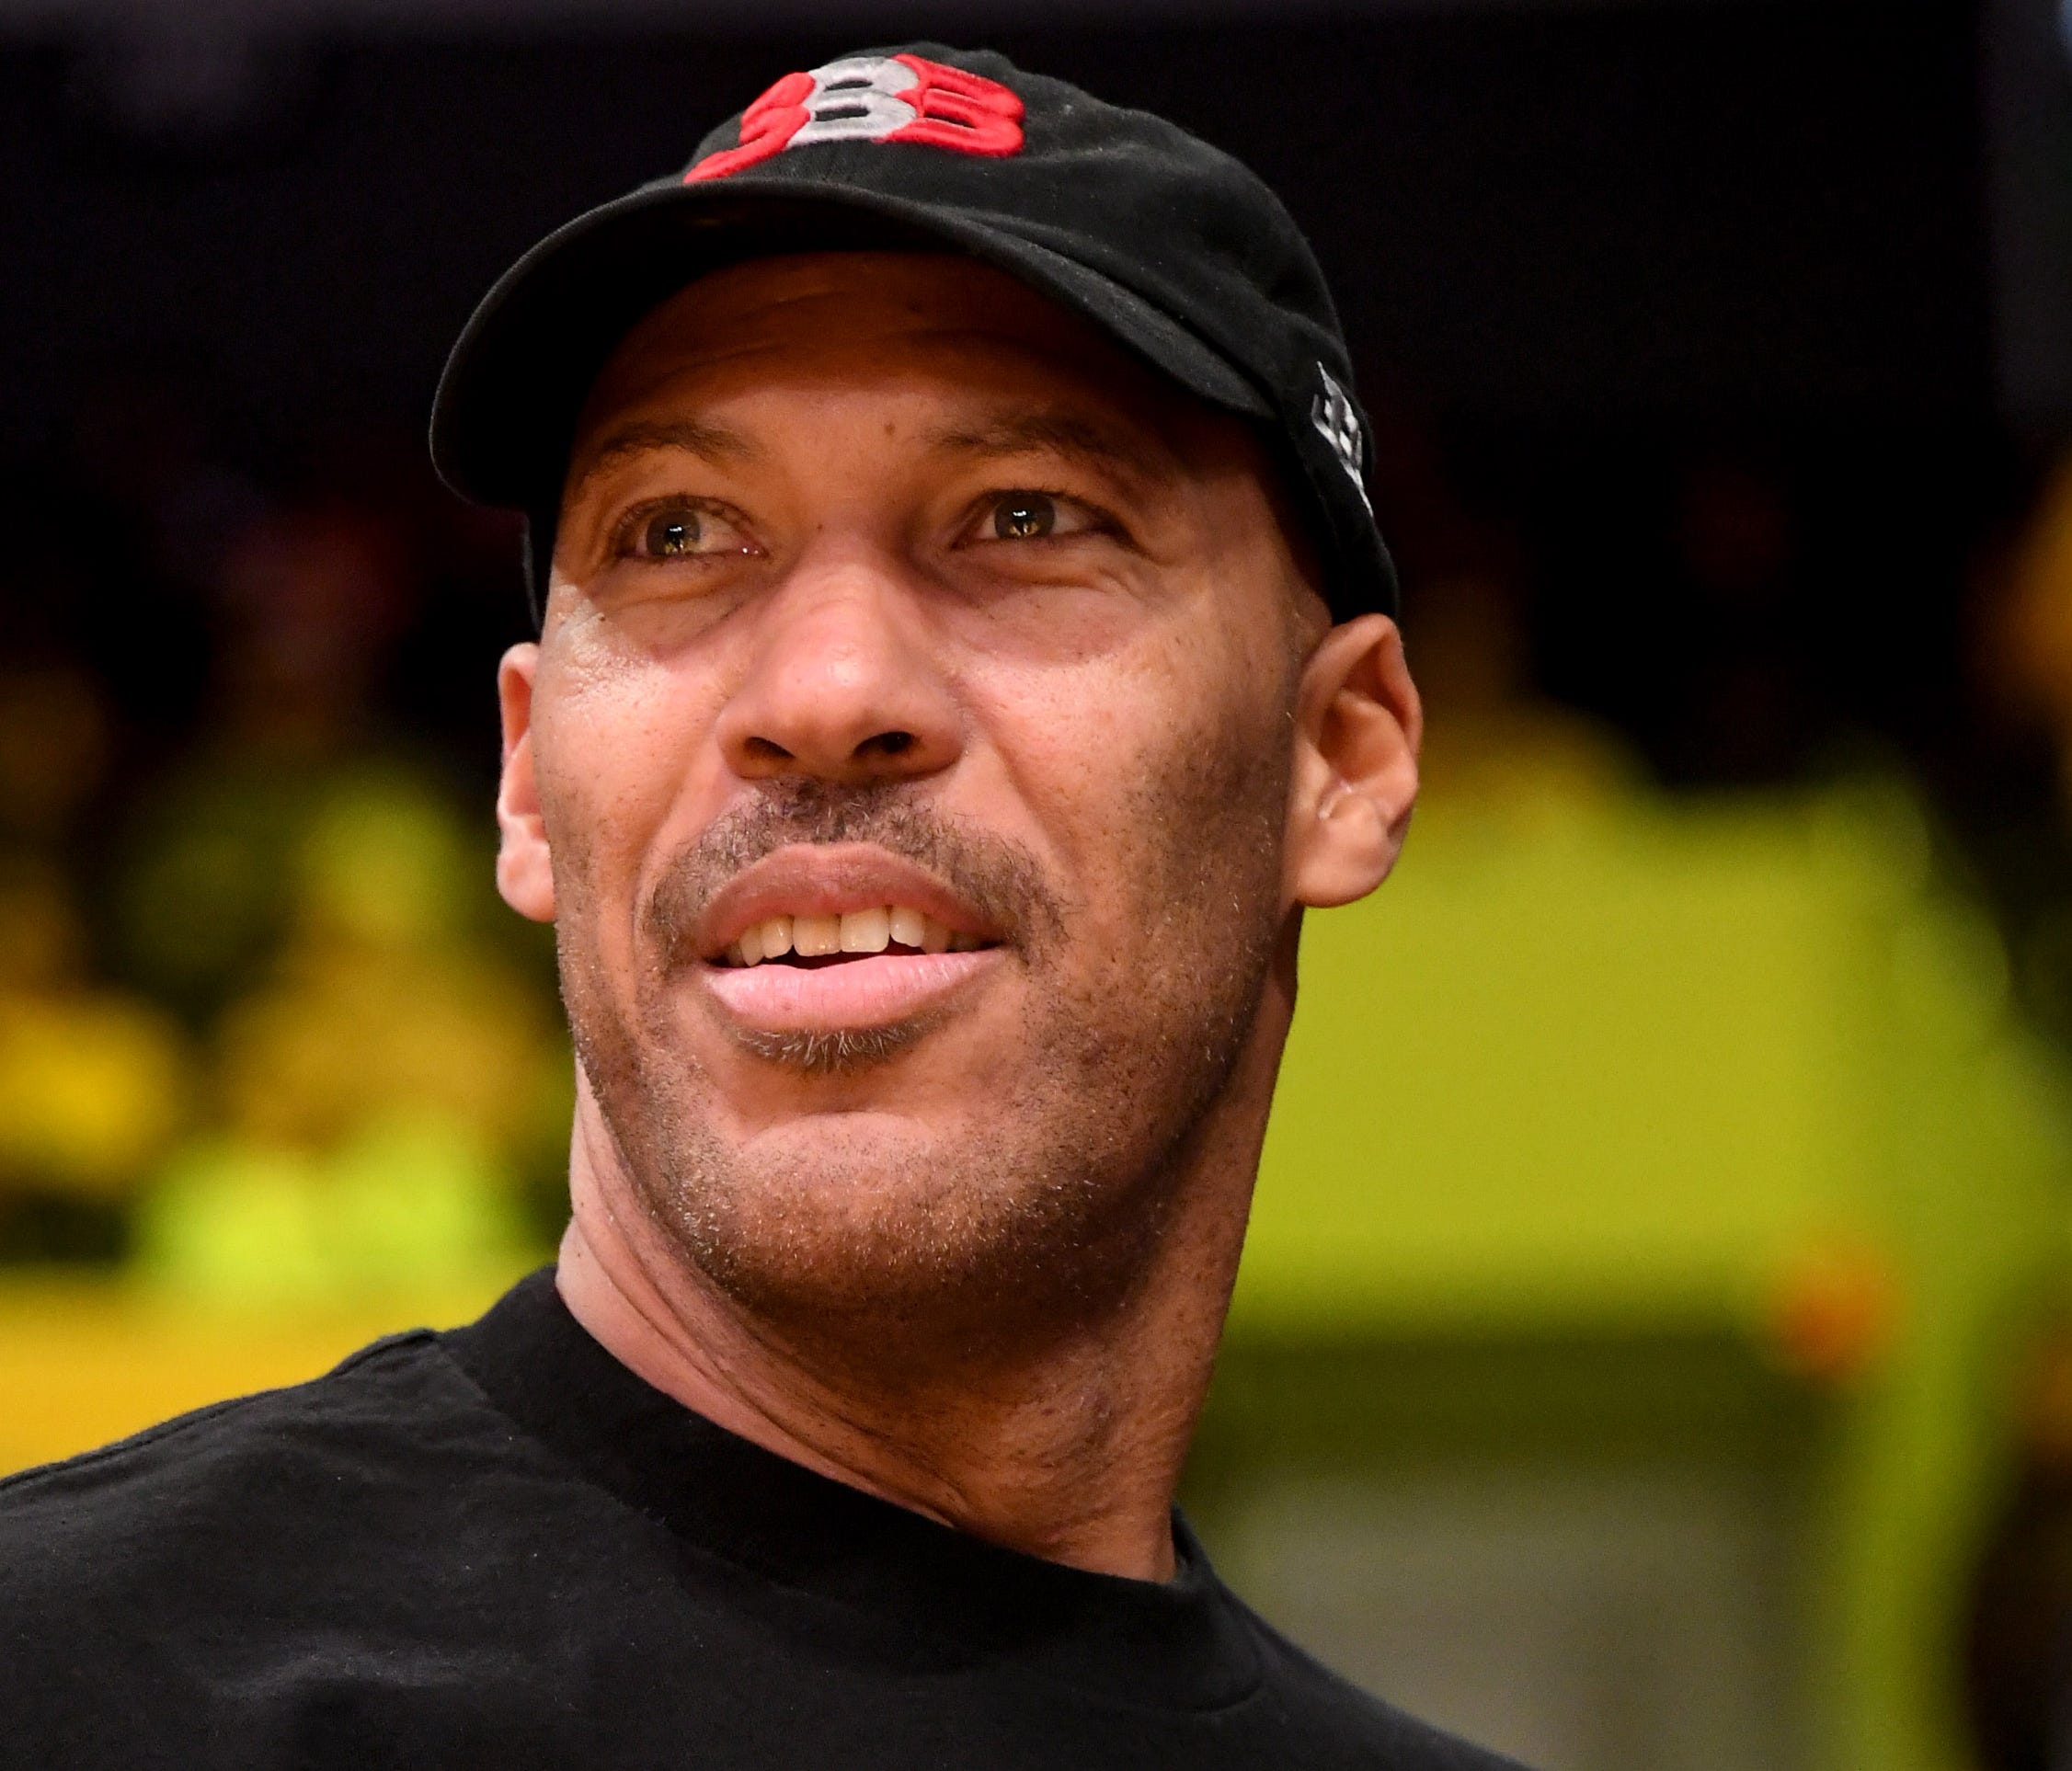 LaVar Ball has removed his second son from school with LiAngelo leaving UCLA.